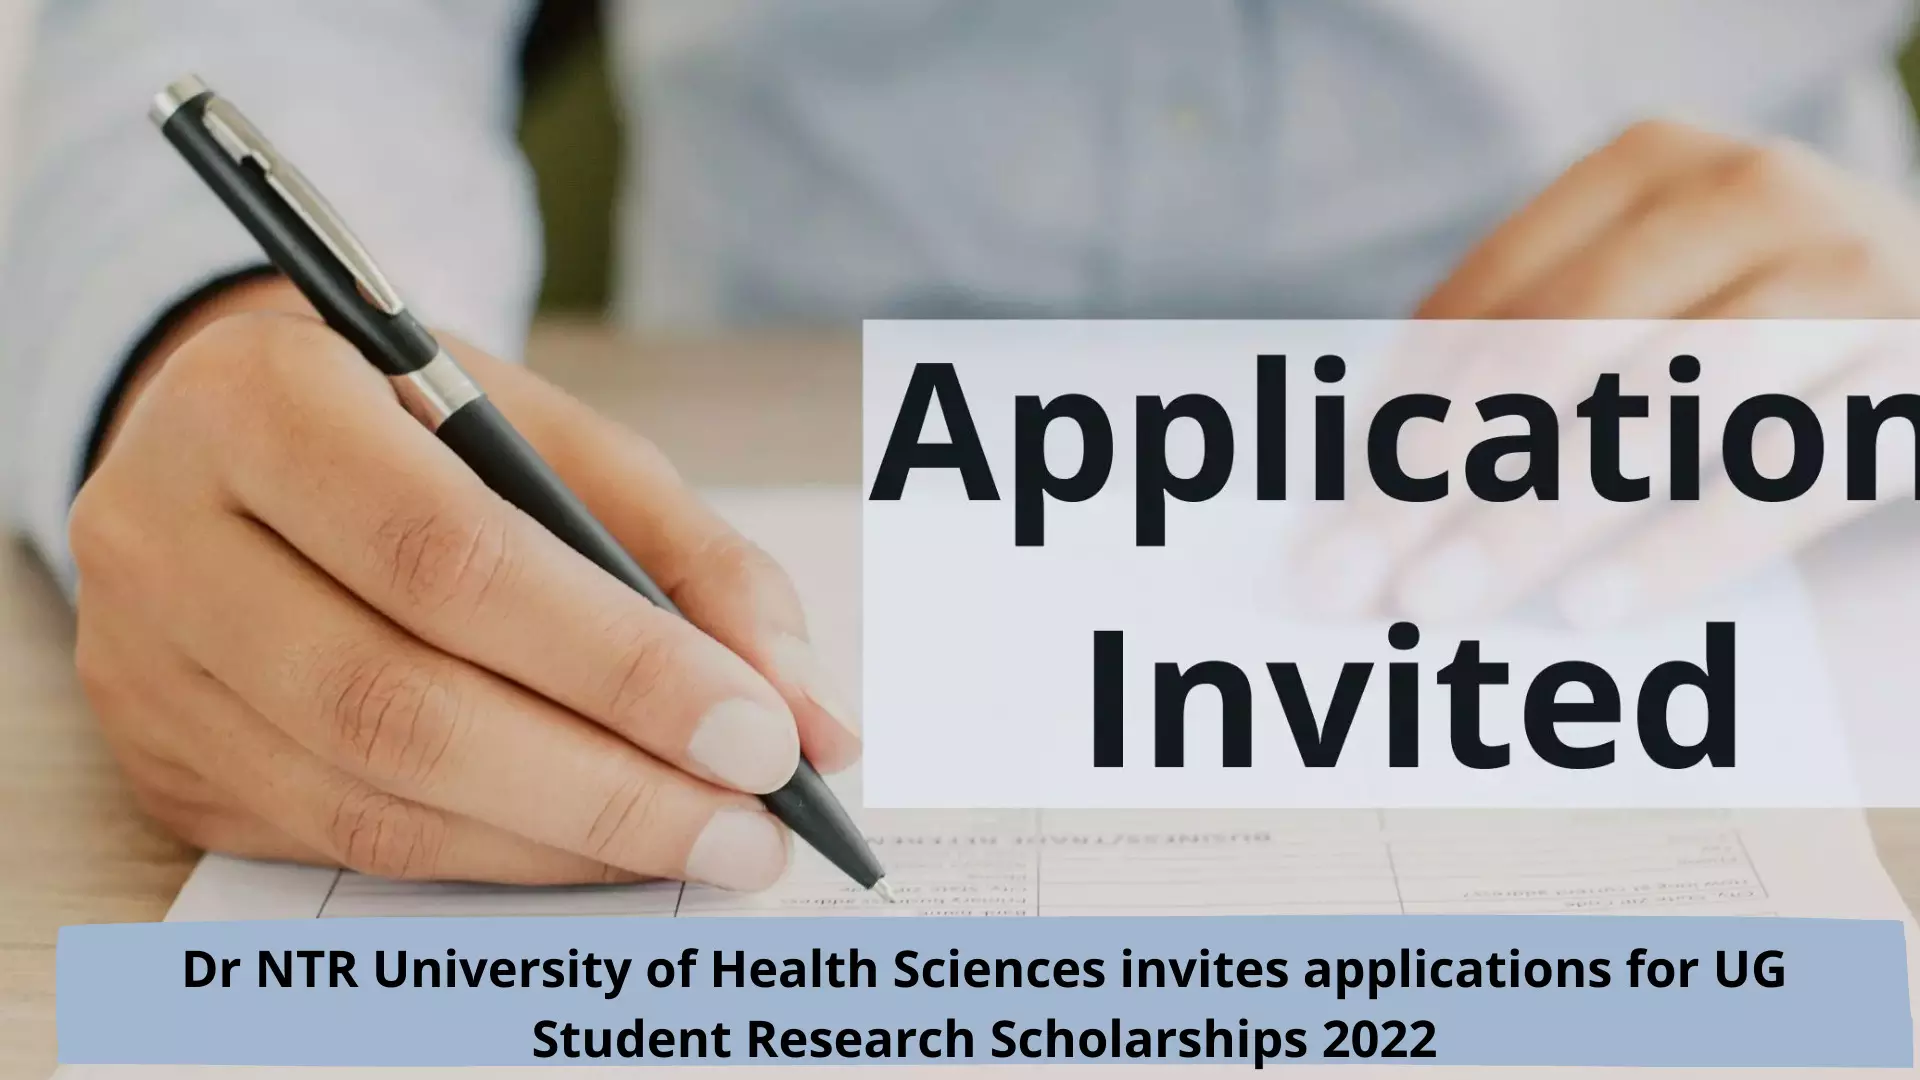 Dr NTR University of Health Sciences invites applications for UG Student Research Scholarships 2022